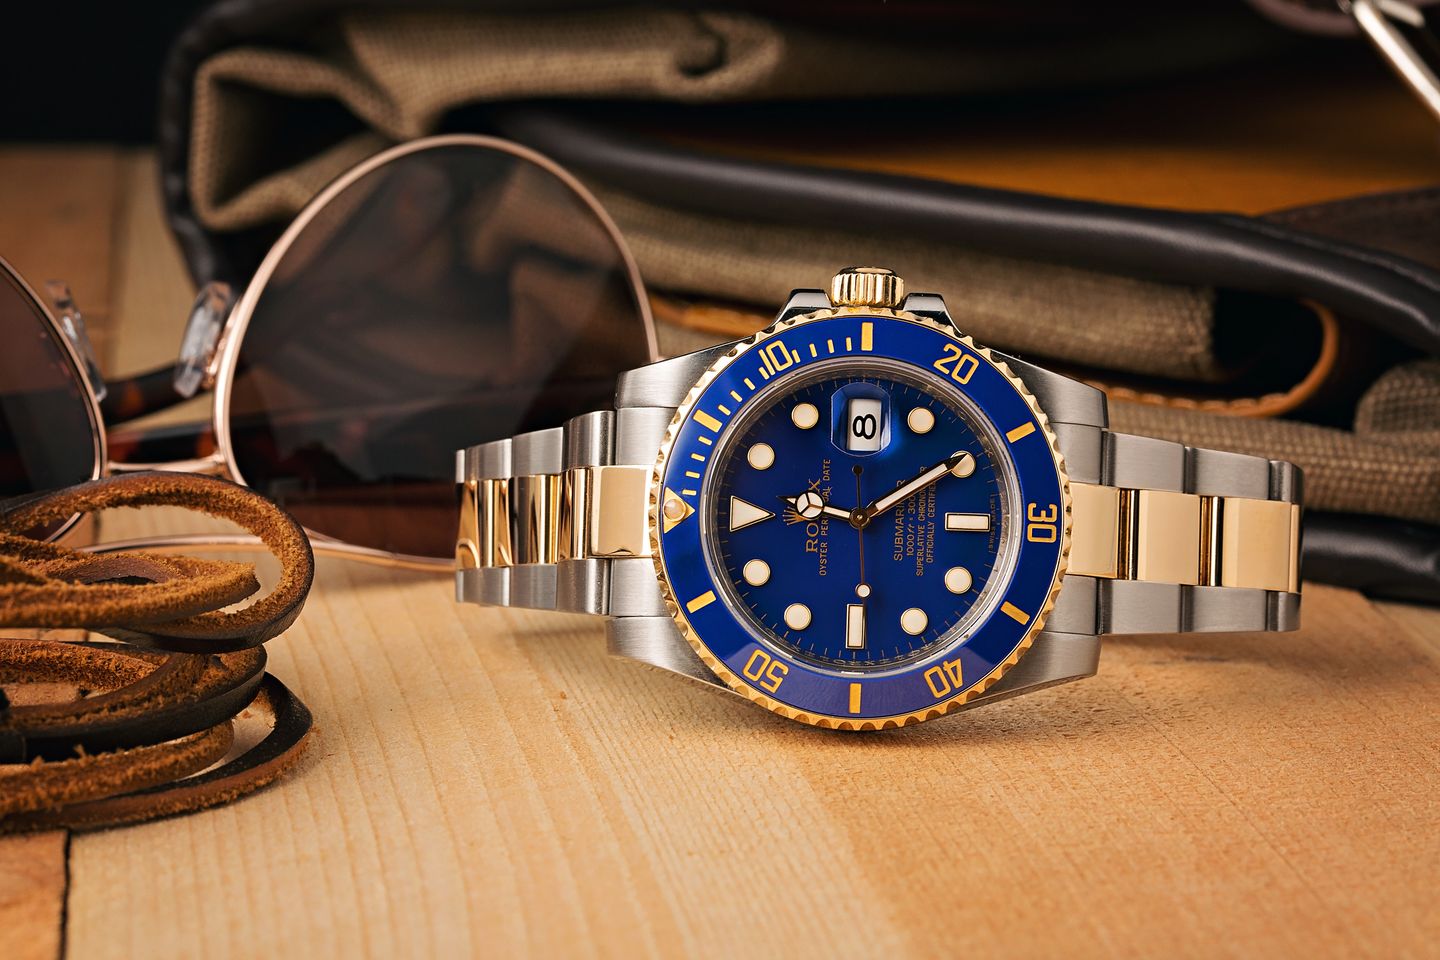 3 Things to Know Before Buying Used Watches - Bob's Watches